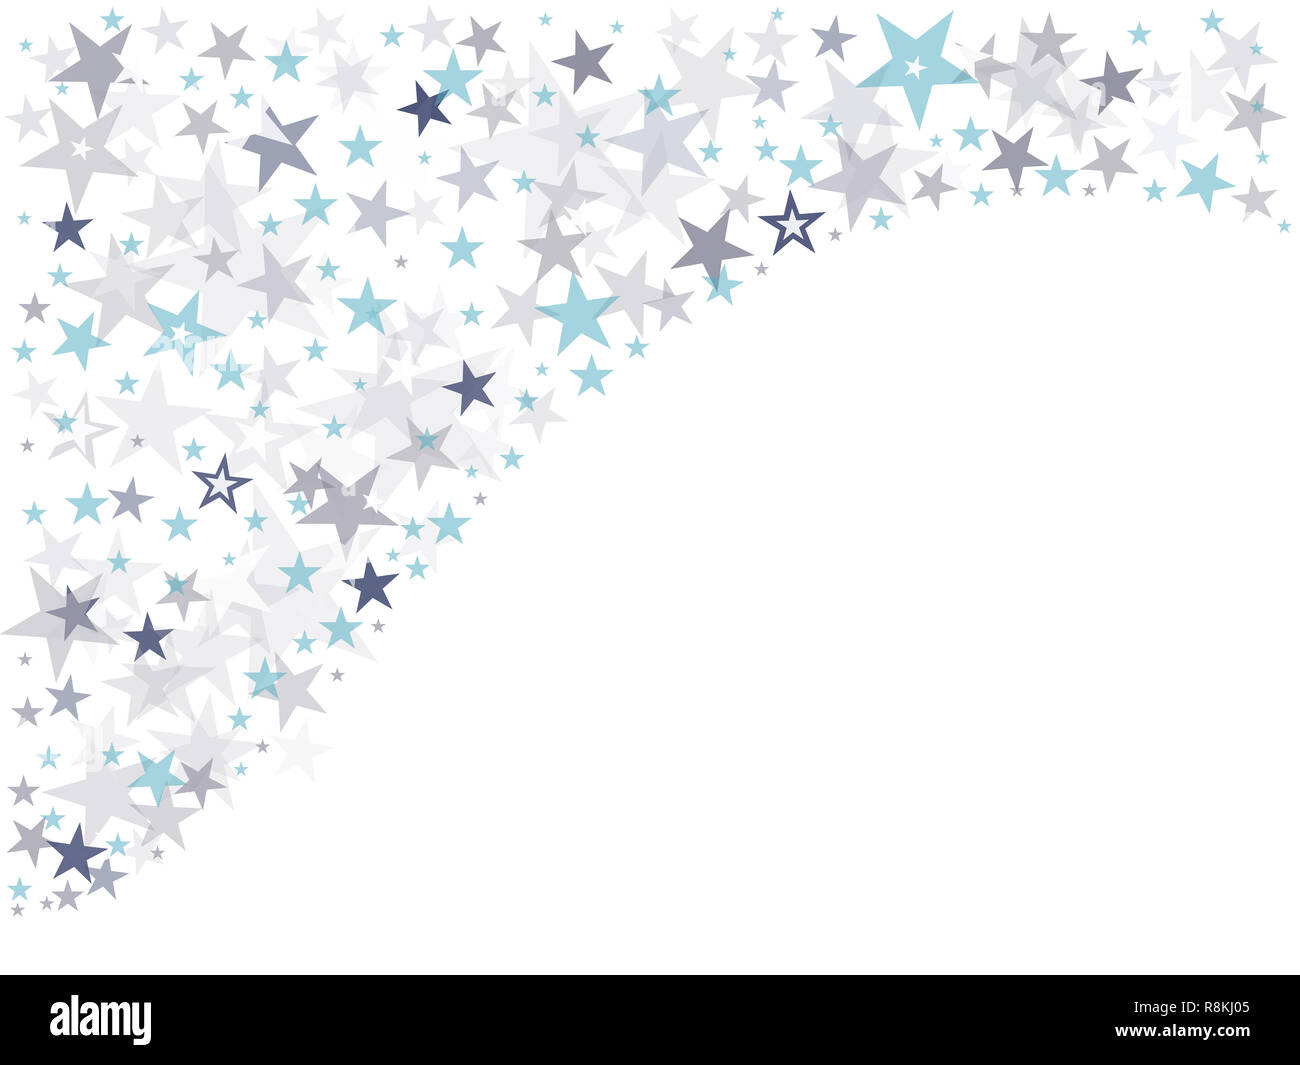 Abstract Stars Background for Design. Vector, illustration, eps10. Stock Photo